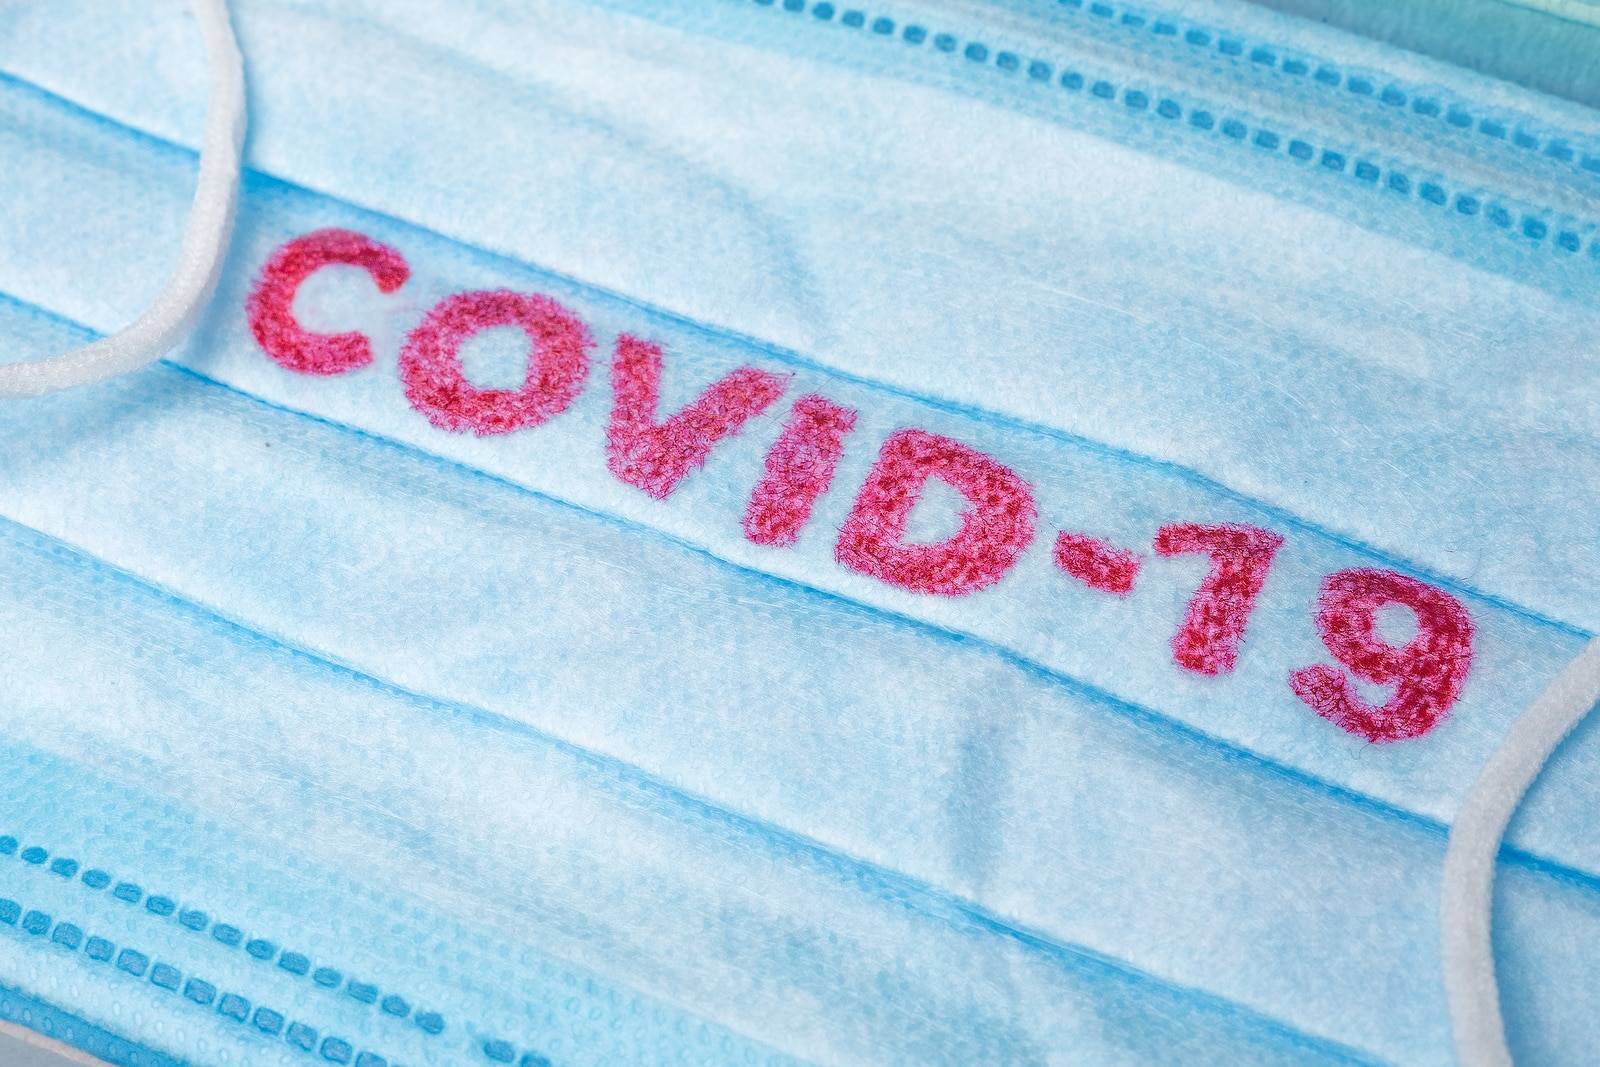 Disposable Face Mask with covid-19 printed on it.